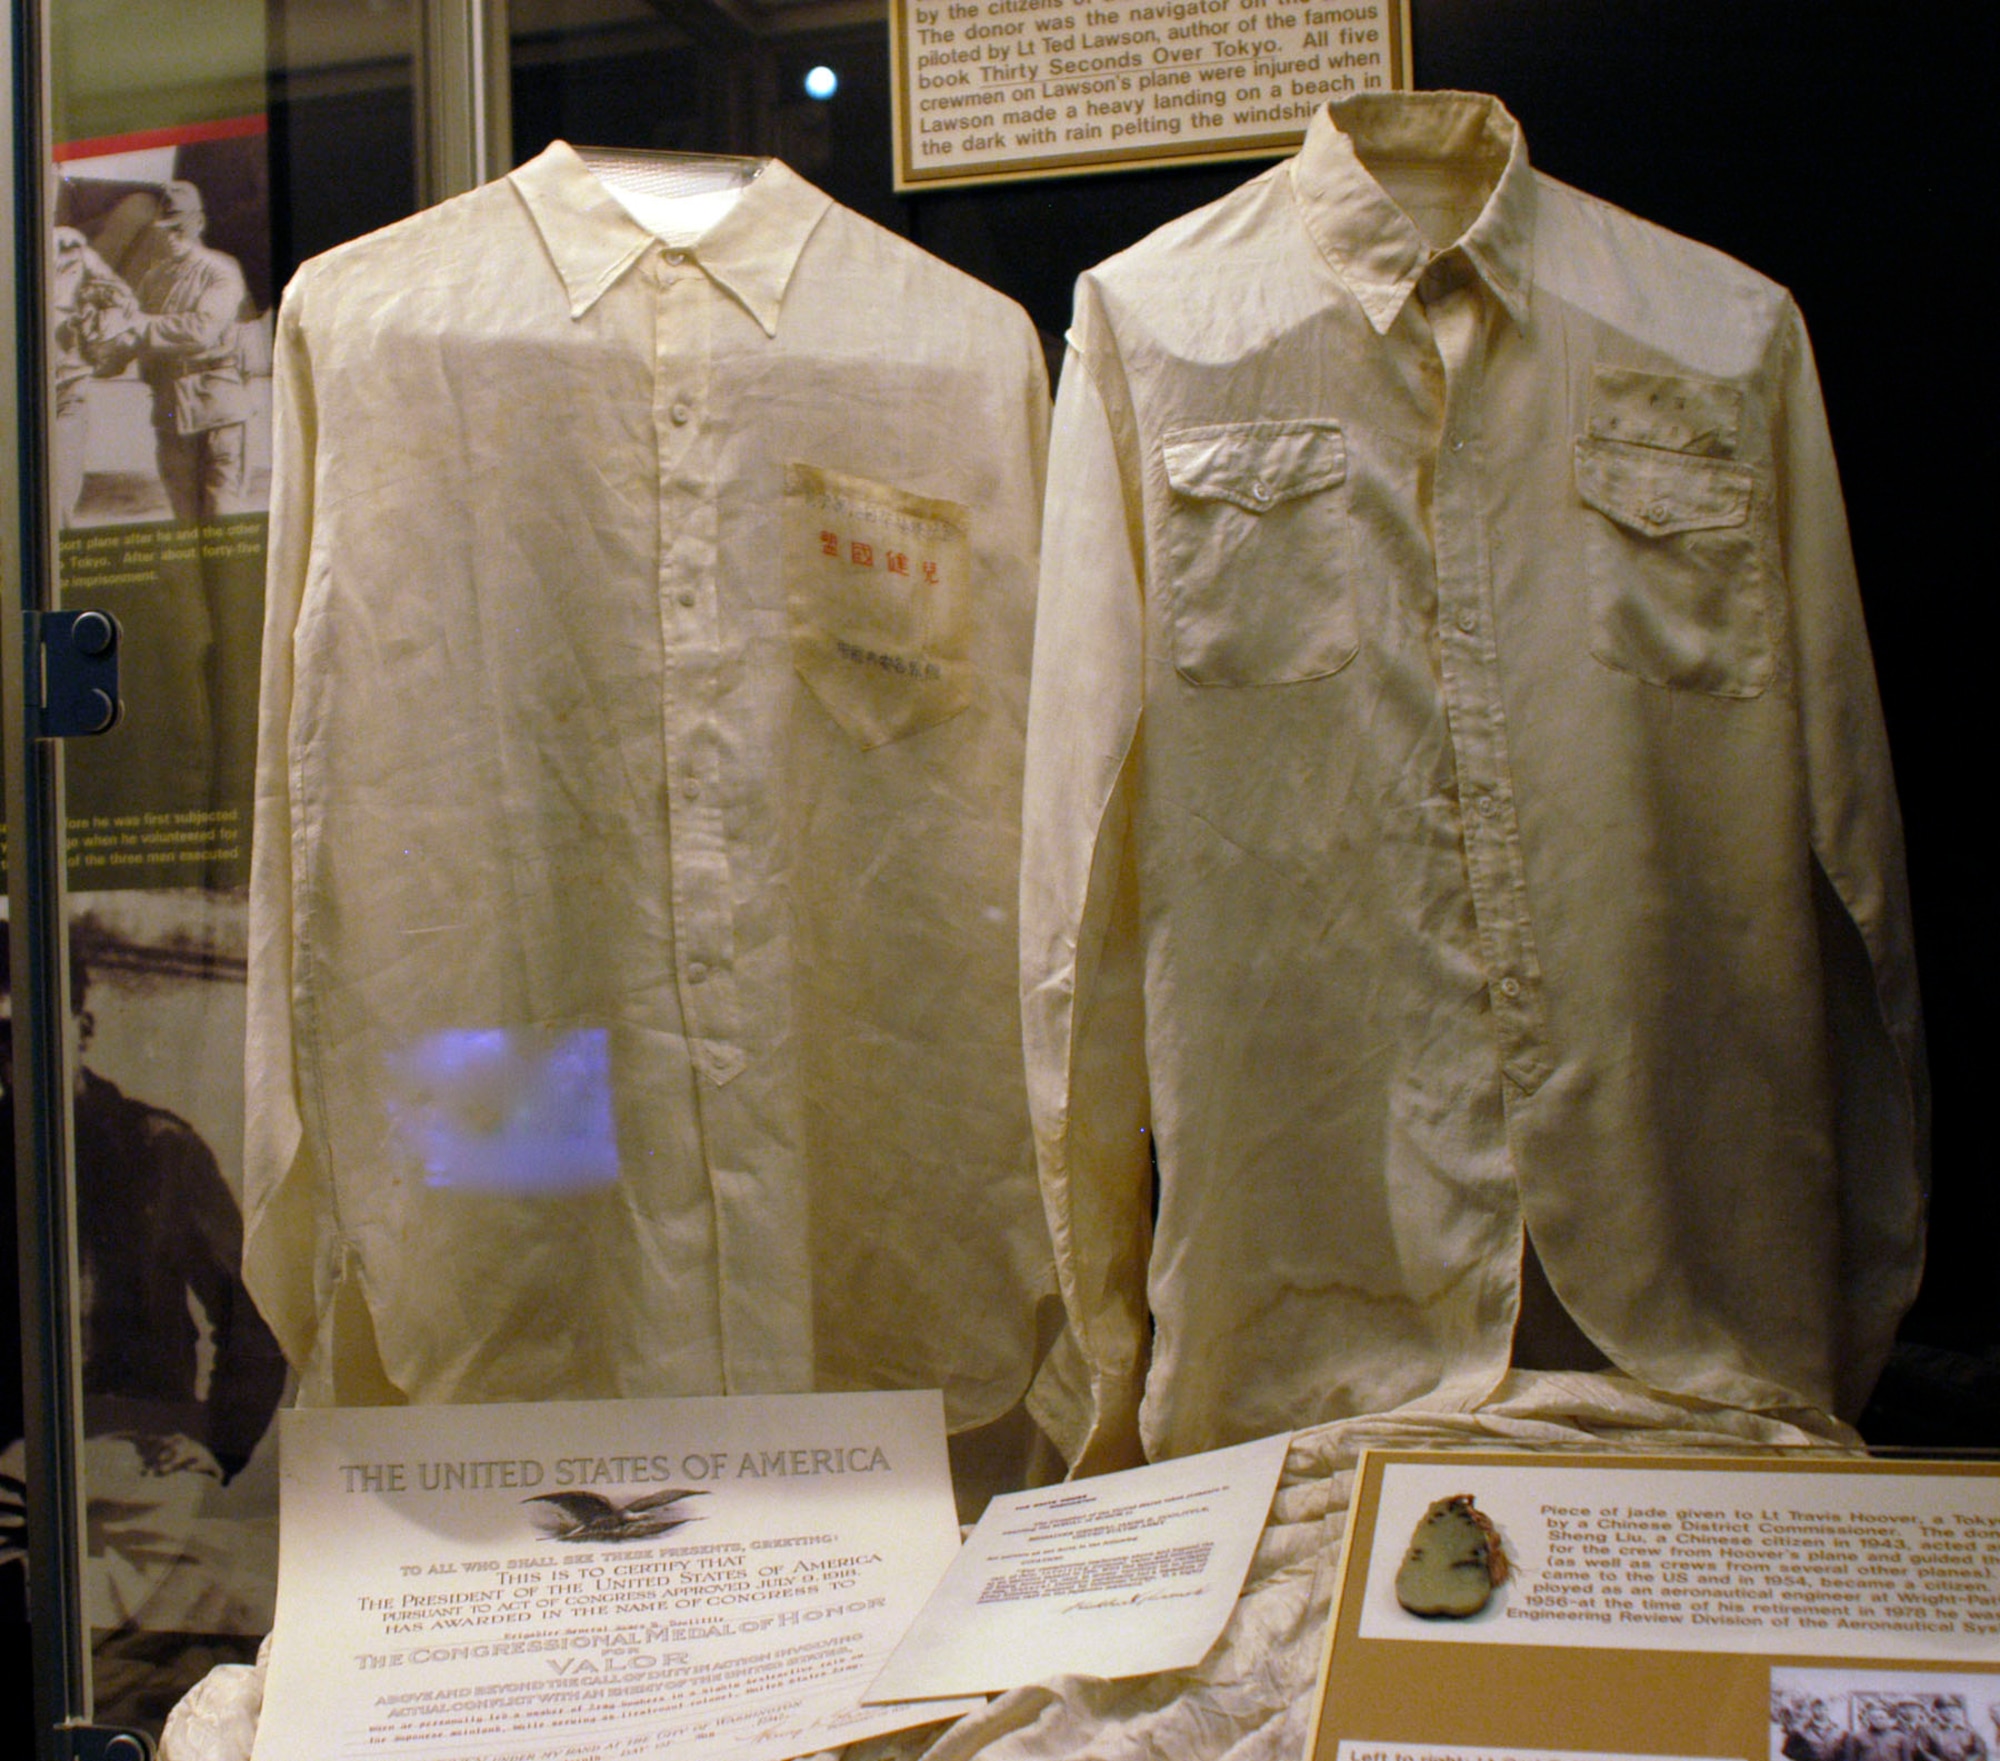 DAYTON, Ohio - (left) Hand-made shirt given to Lt. Charles L. McClure while hiding in China. (right) Silk shirt given to Lt. Charles A. Knobloch by Chinese when he entered friendly territory. (U.S. Air Force photo)    